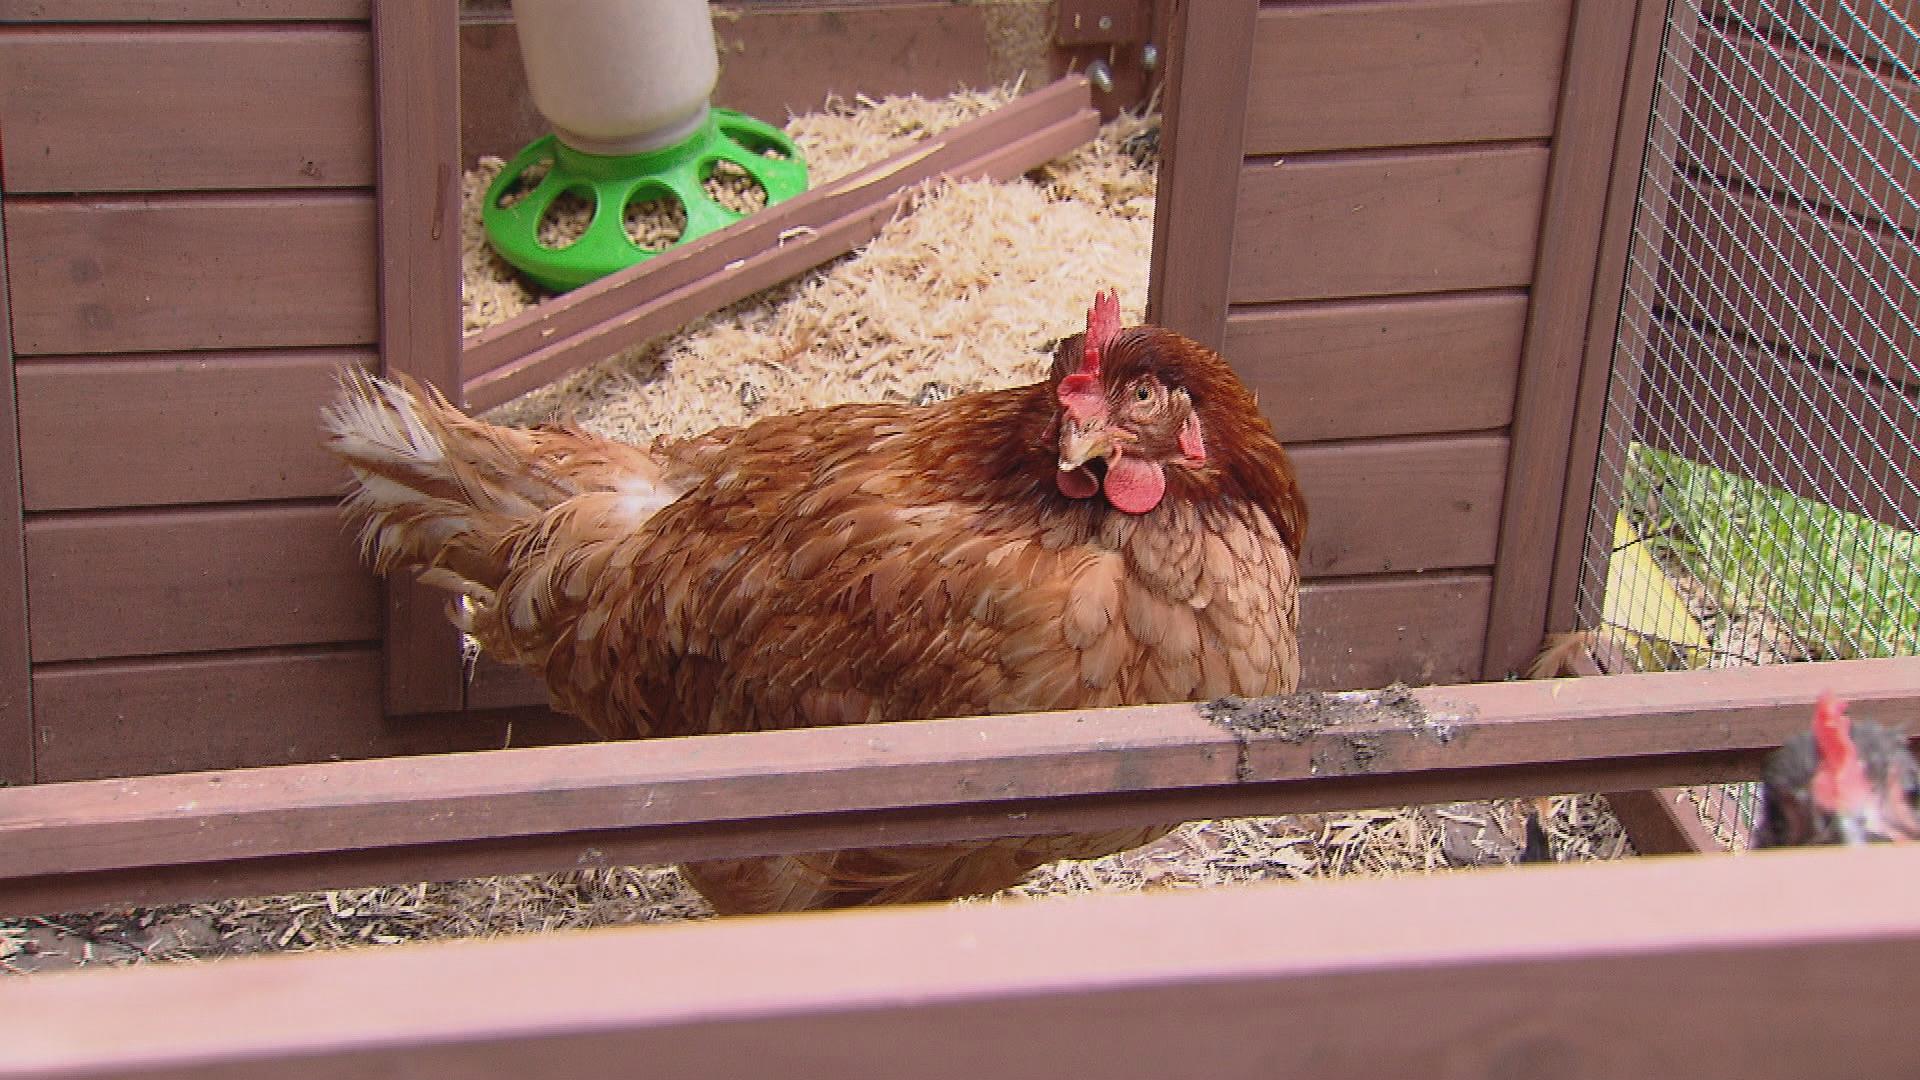 Cdc Links Backyard Chickens To Nationwide Salmonella Outbreaks